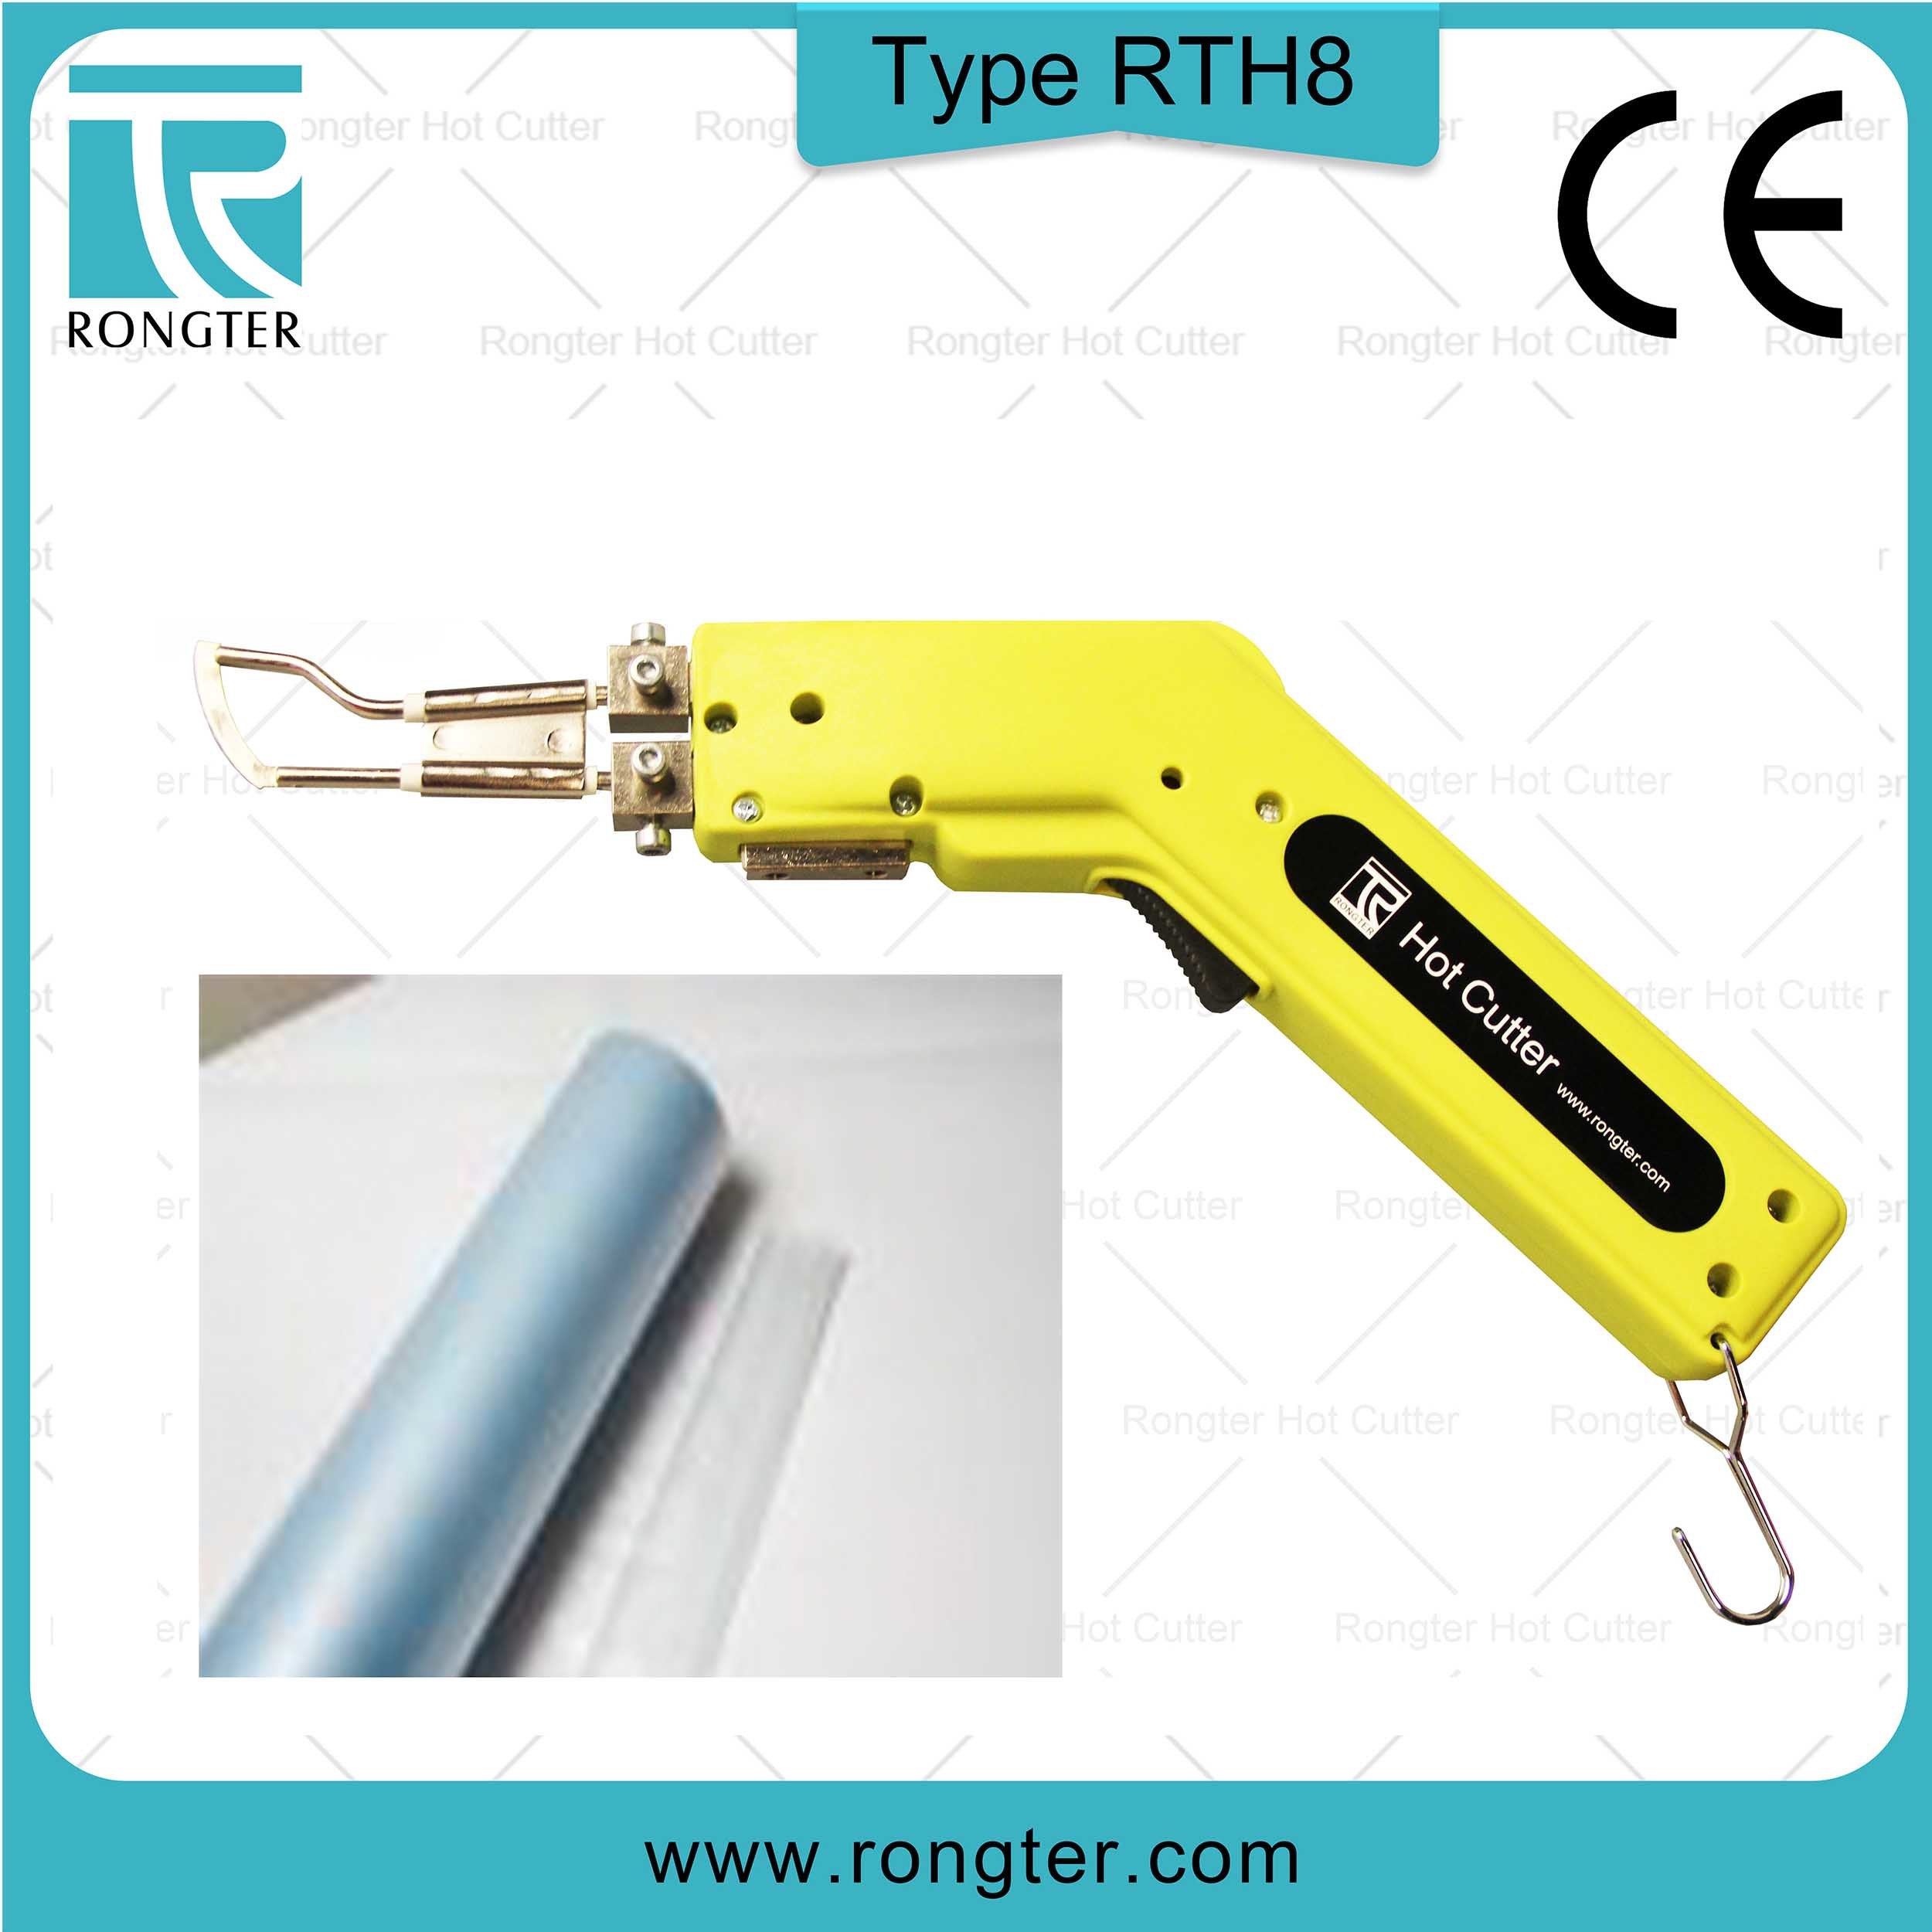 110V High Power Electric Plastic Cutting Automatic Knife Tool